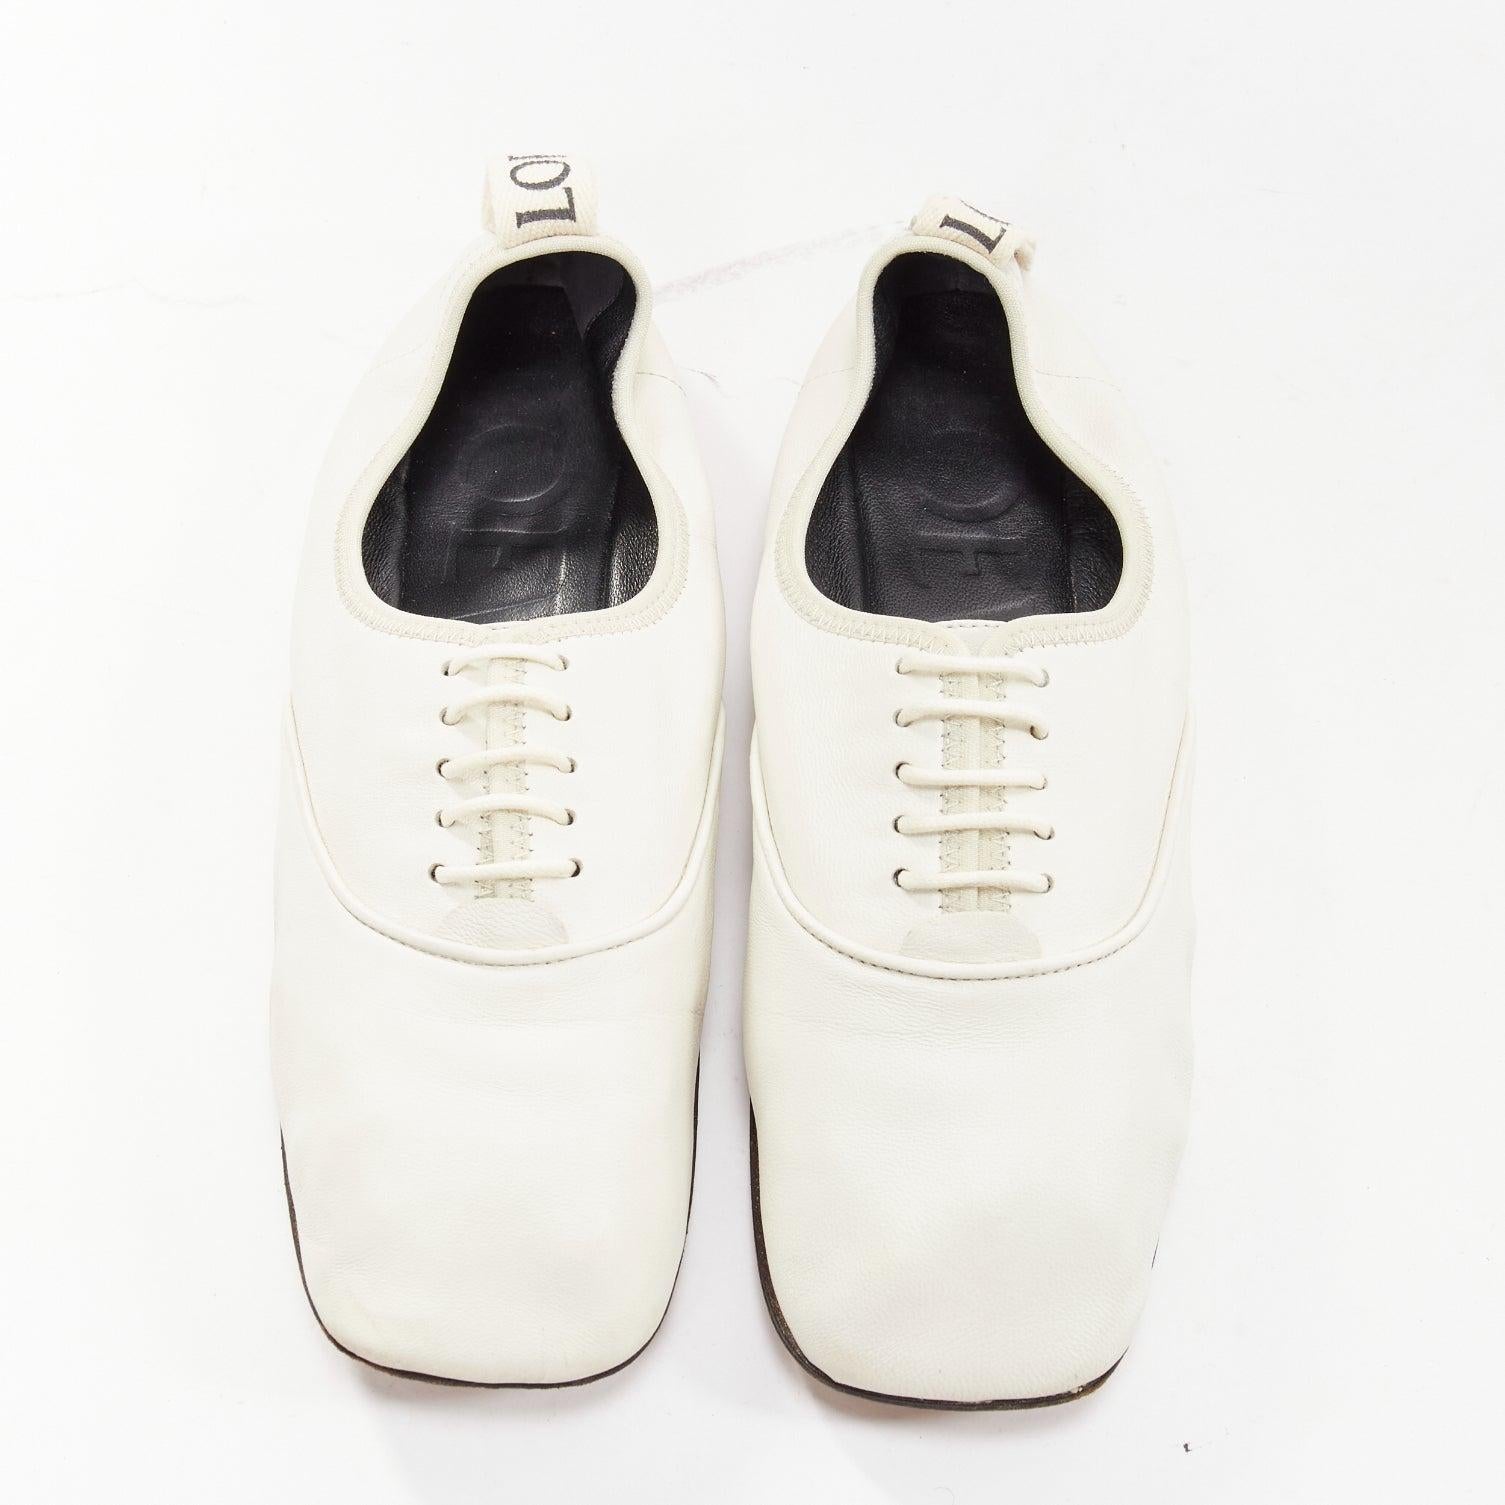 LOEWE Derby white soft leather black logo tab lace up flat shoes EU37
Reference: KYCG/A00041
Brand: Loewe
Designer: JW Anderson
Model: Derby
Material: Leather
Color: White, Black
Pattern: Solid
Closure: Lace Up
Lining: Black Leather
Extra Details: